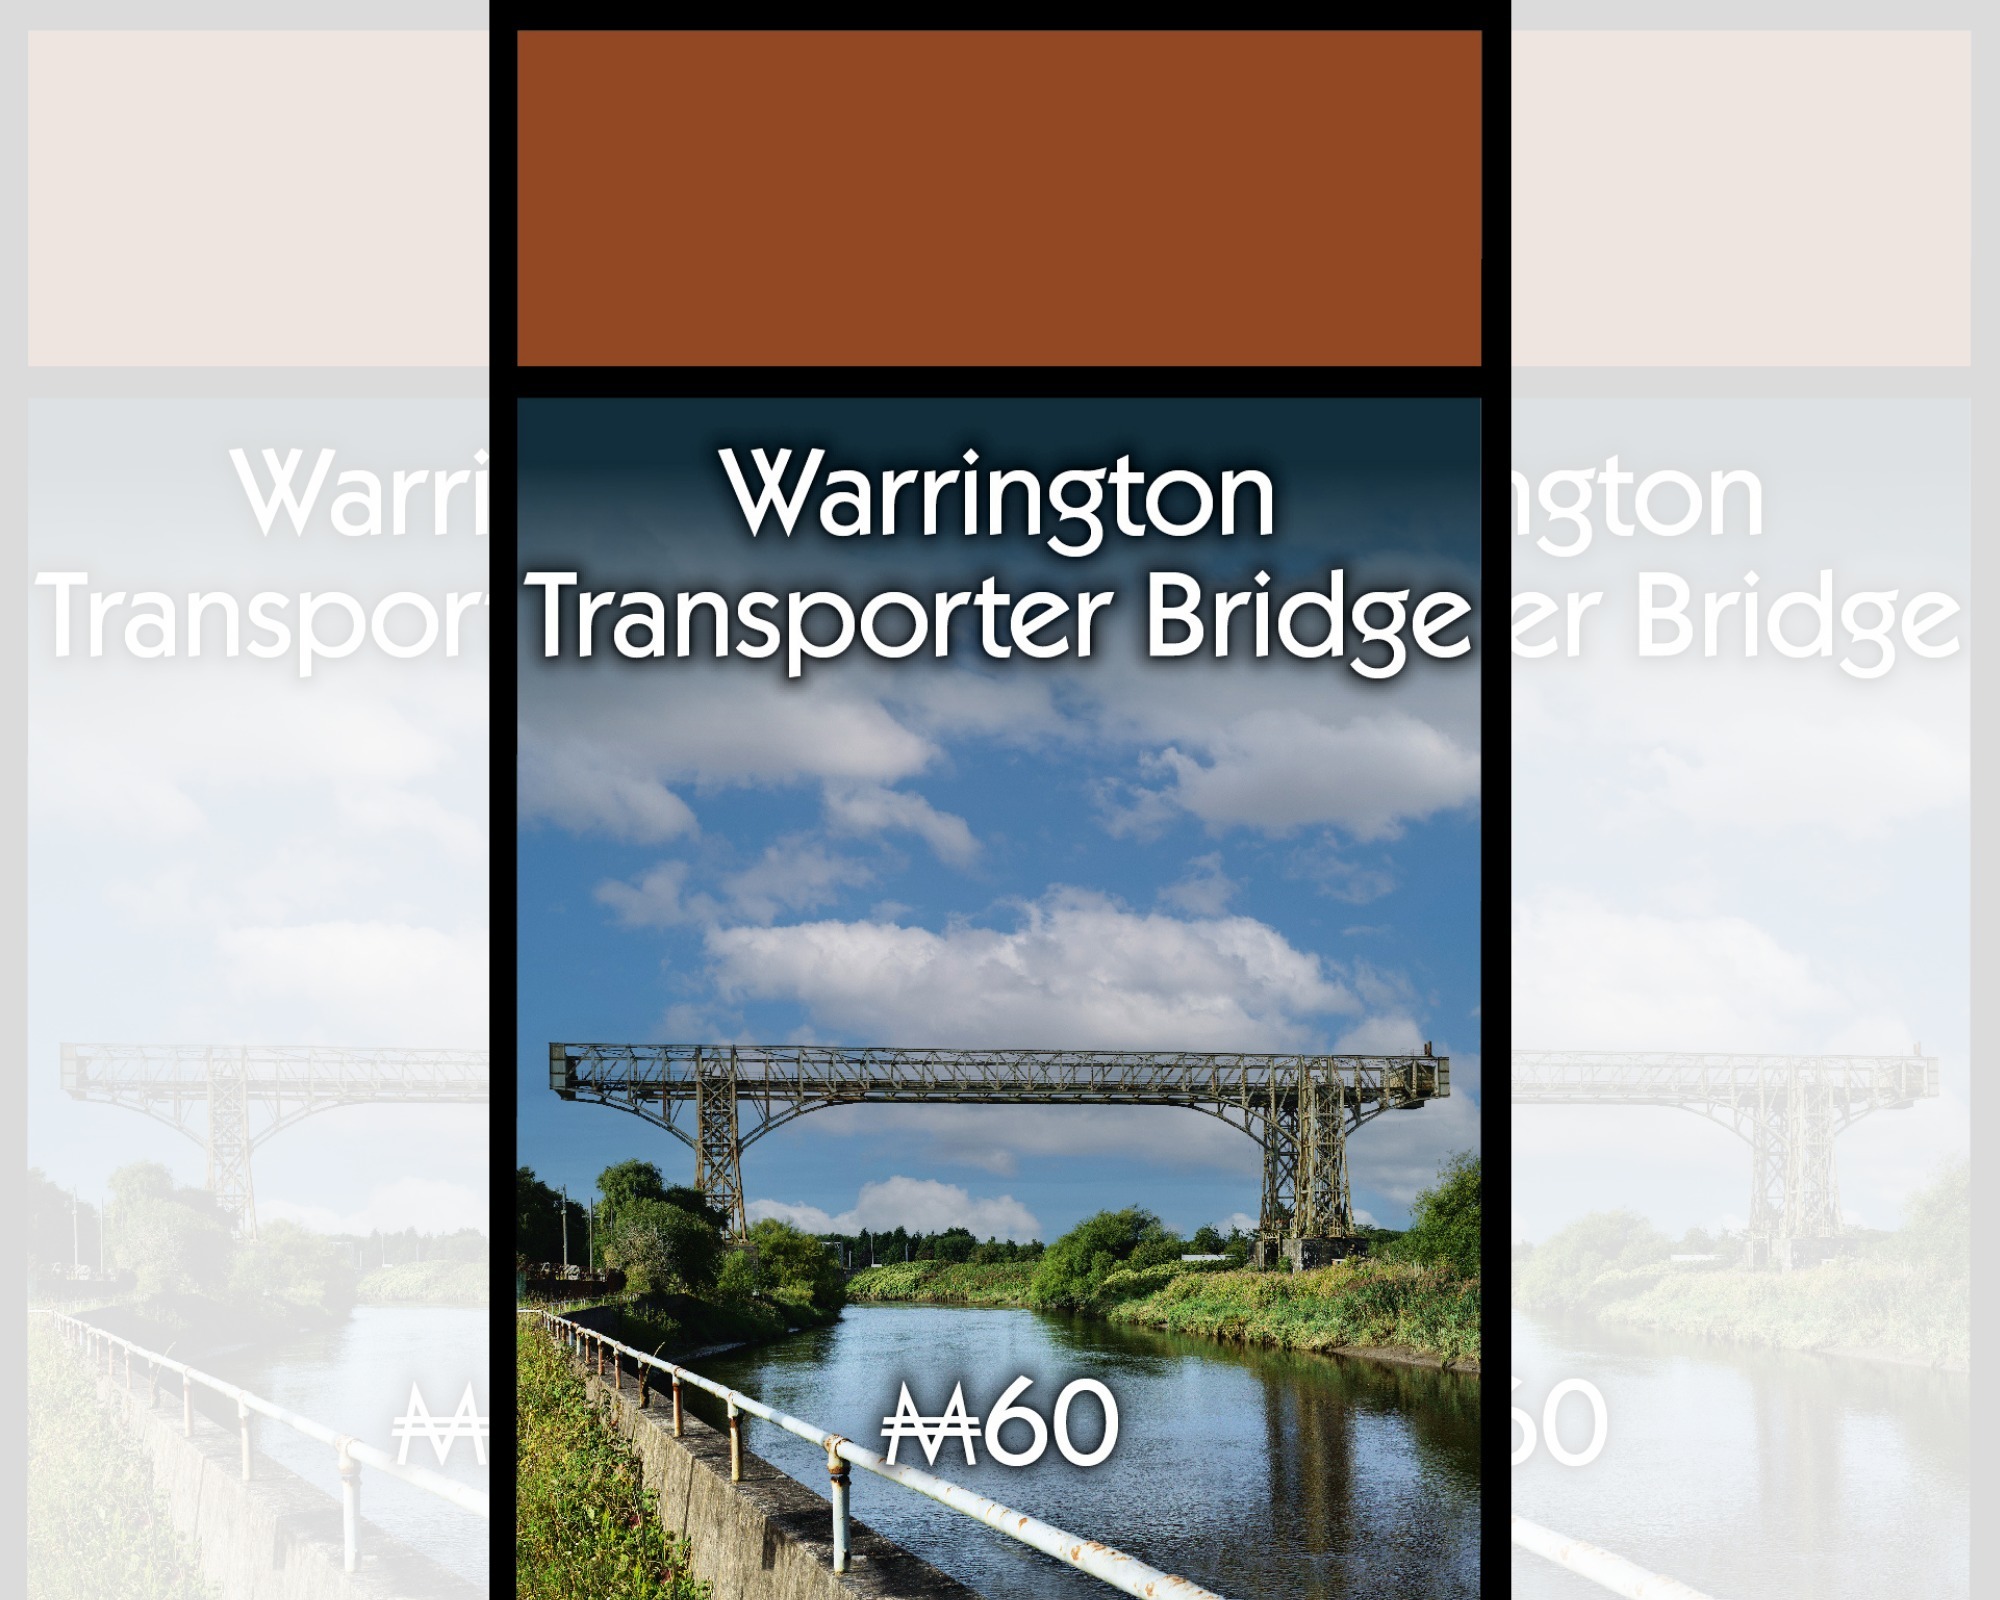 Warrington Transporter Bridge was the first confirmed square